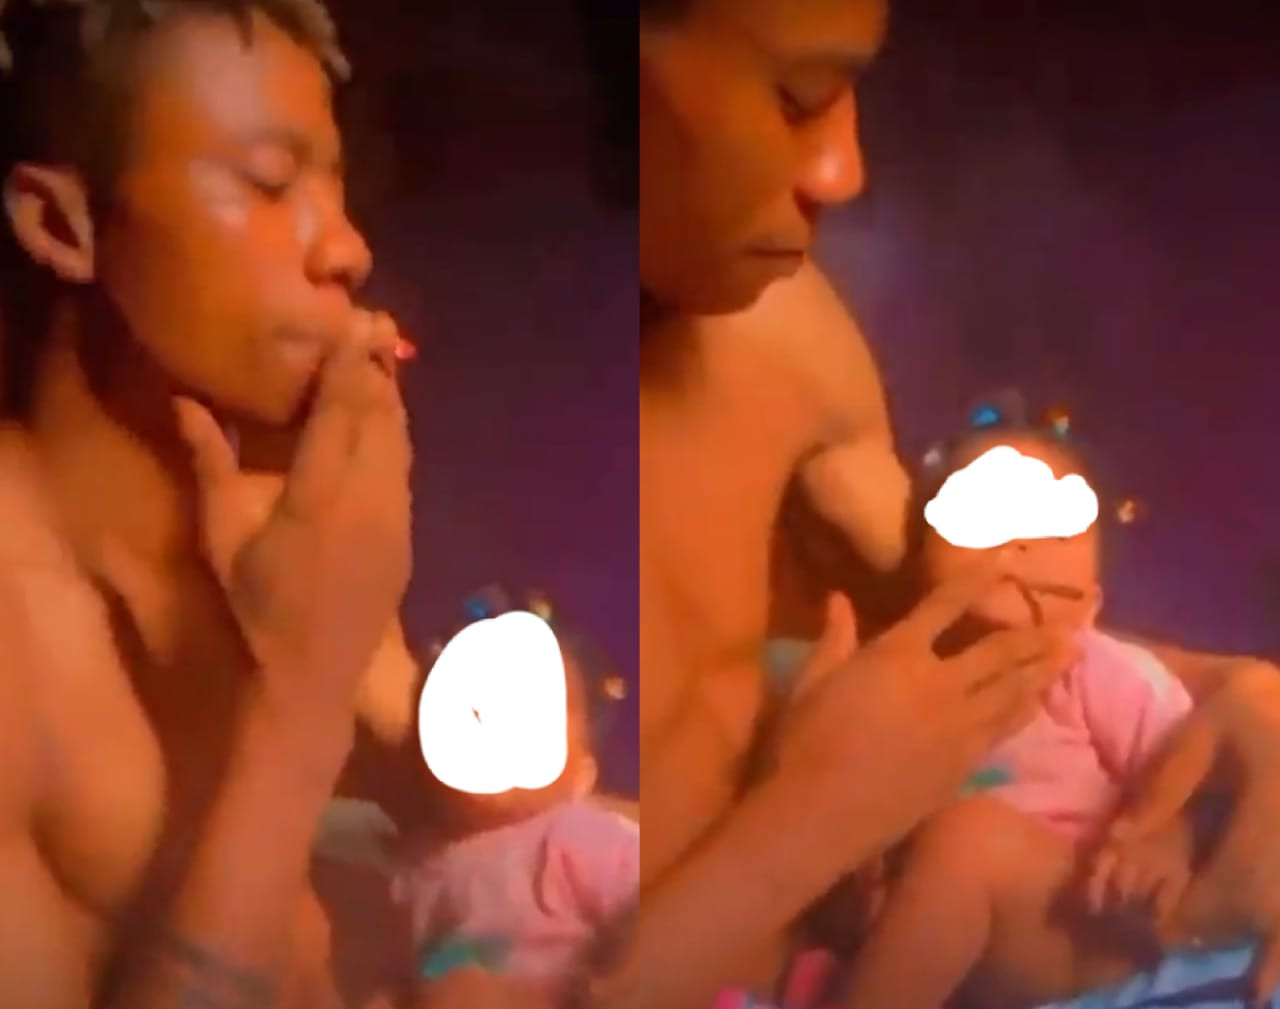 He must face the law - Police PRO reacts to viral video of man giving a baby marijuana to smoke